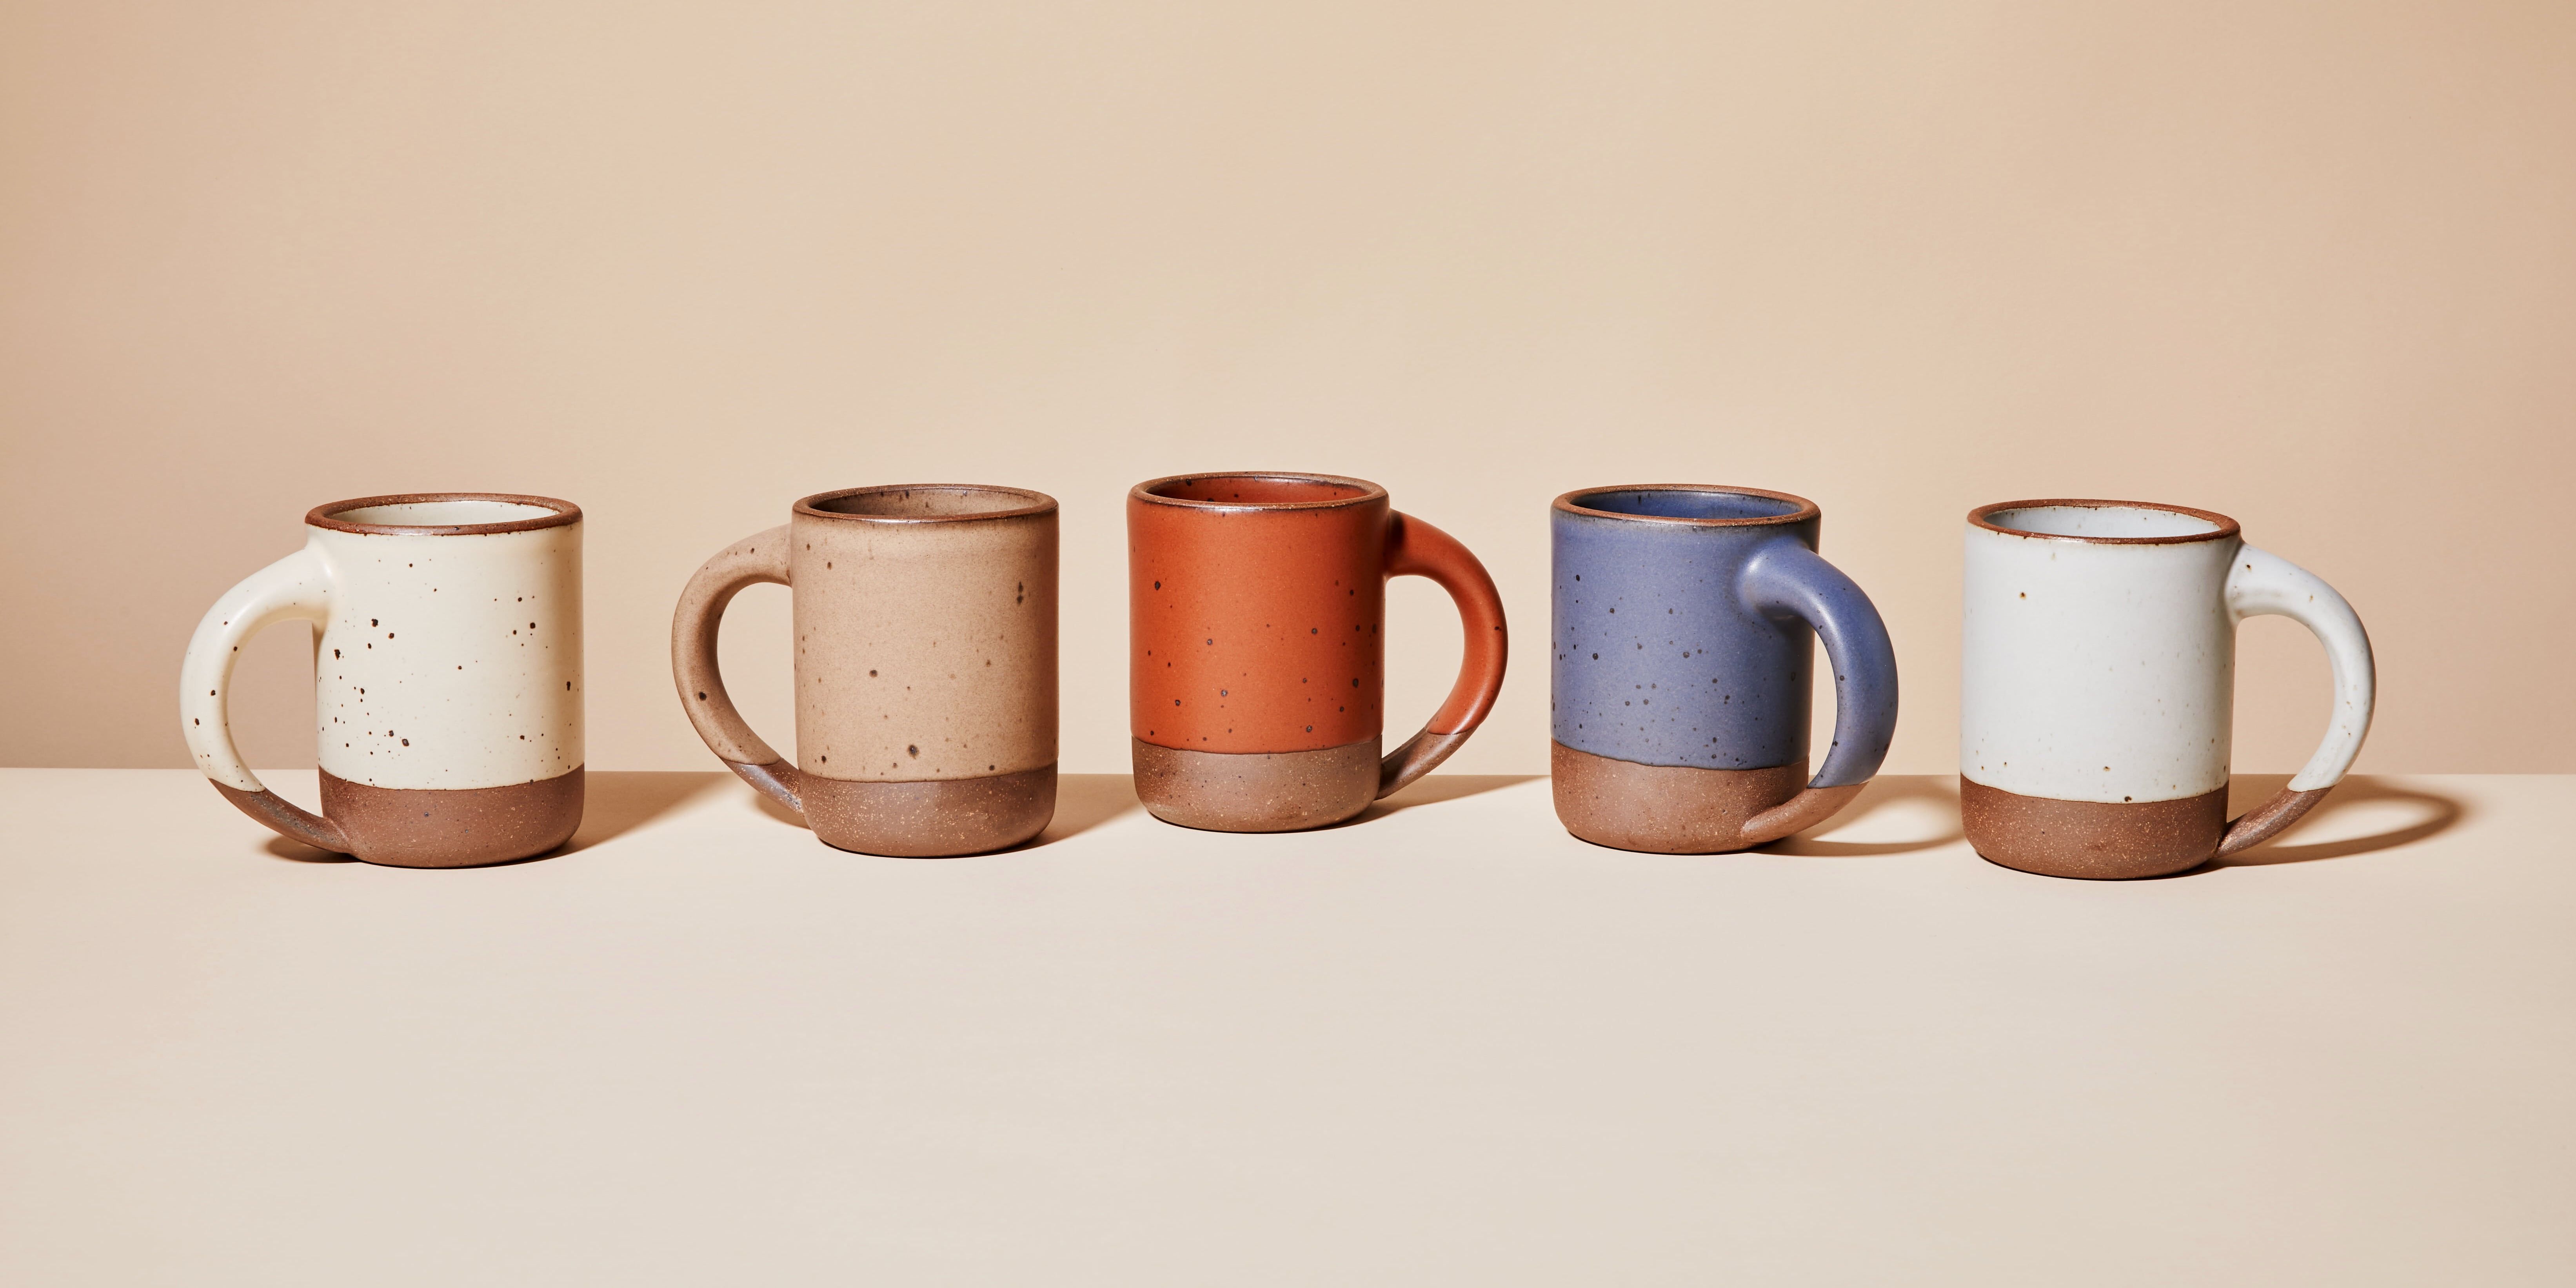 Five ceramic mugs are lined up in a row. Each mug features an unglazed bottom and a ceramic glaze on the body. Each mug has a different color from left to right: cream, muted tan, cool terracotta, muted navy, and cool white.